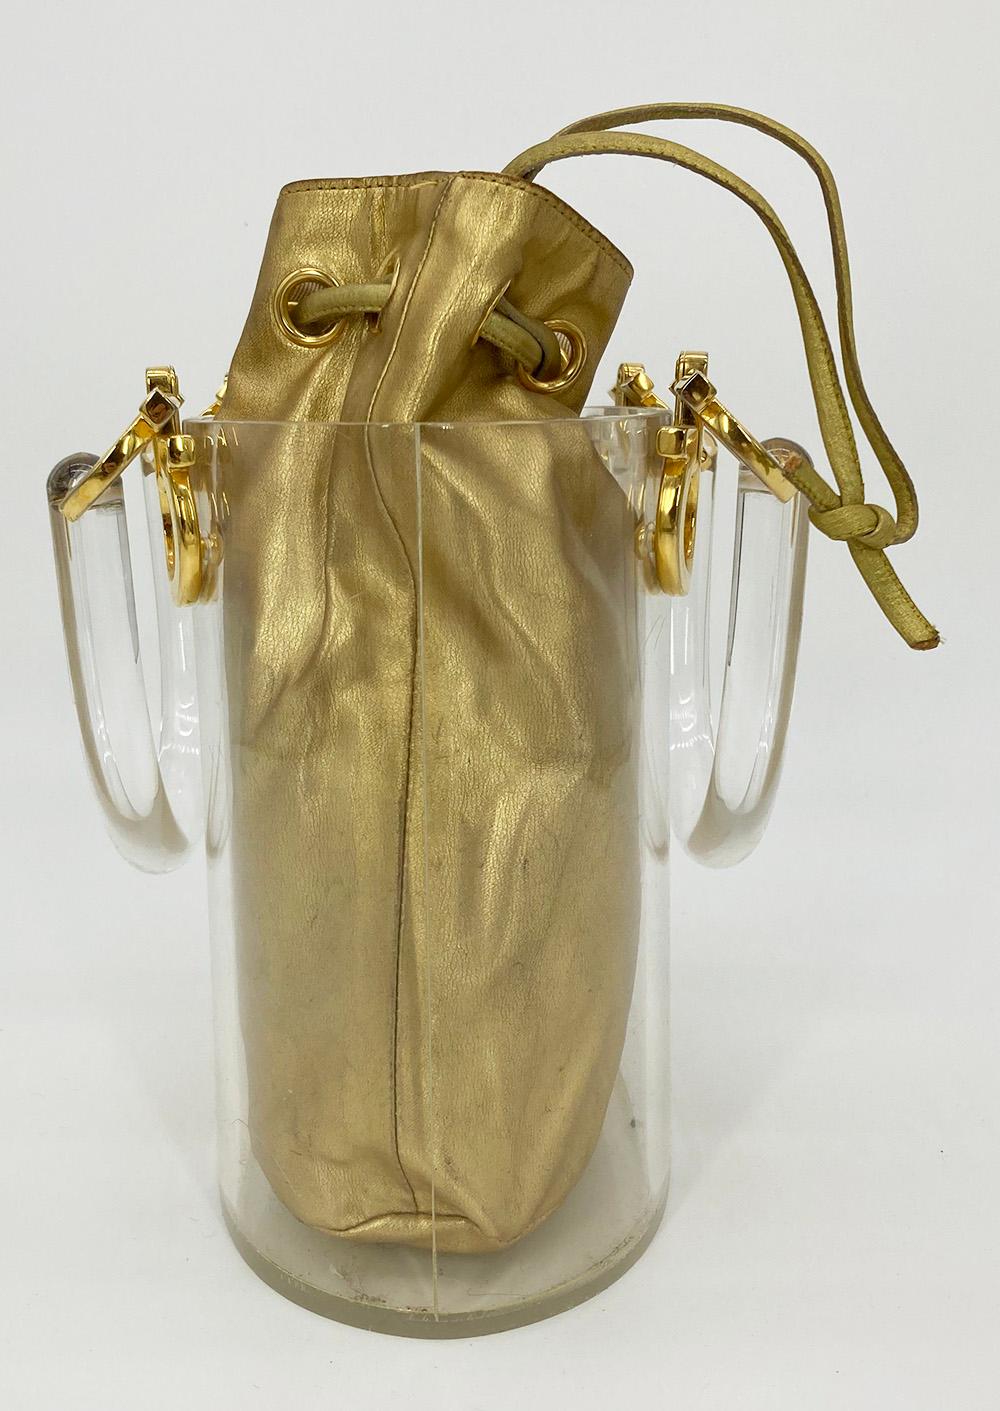 Vintage Salvatore Ferragamo Clear Bucket Bag with Gold Pouch in fair condition. Clear acrylic curved hardshell bucket with double handles and gold tone signature ferragamo hardware at each end of handles. Gold leather drawstring interior pouch can